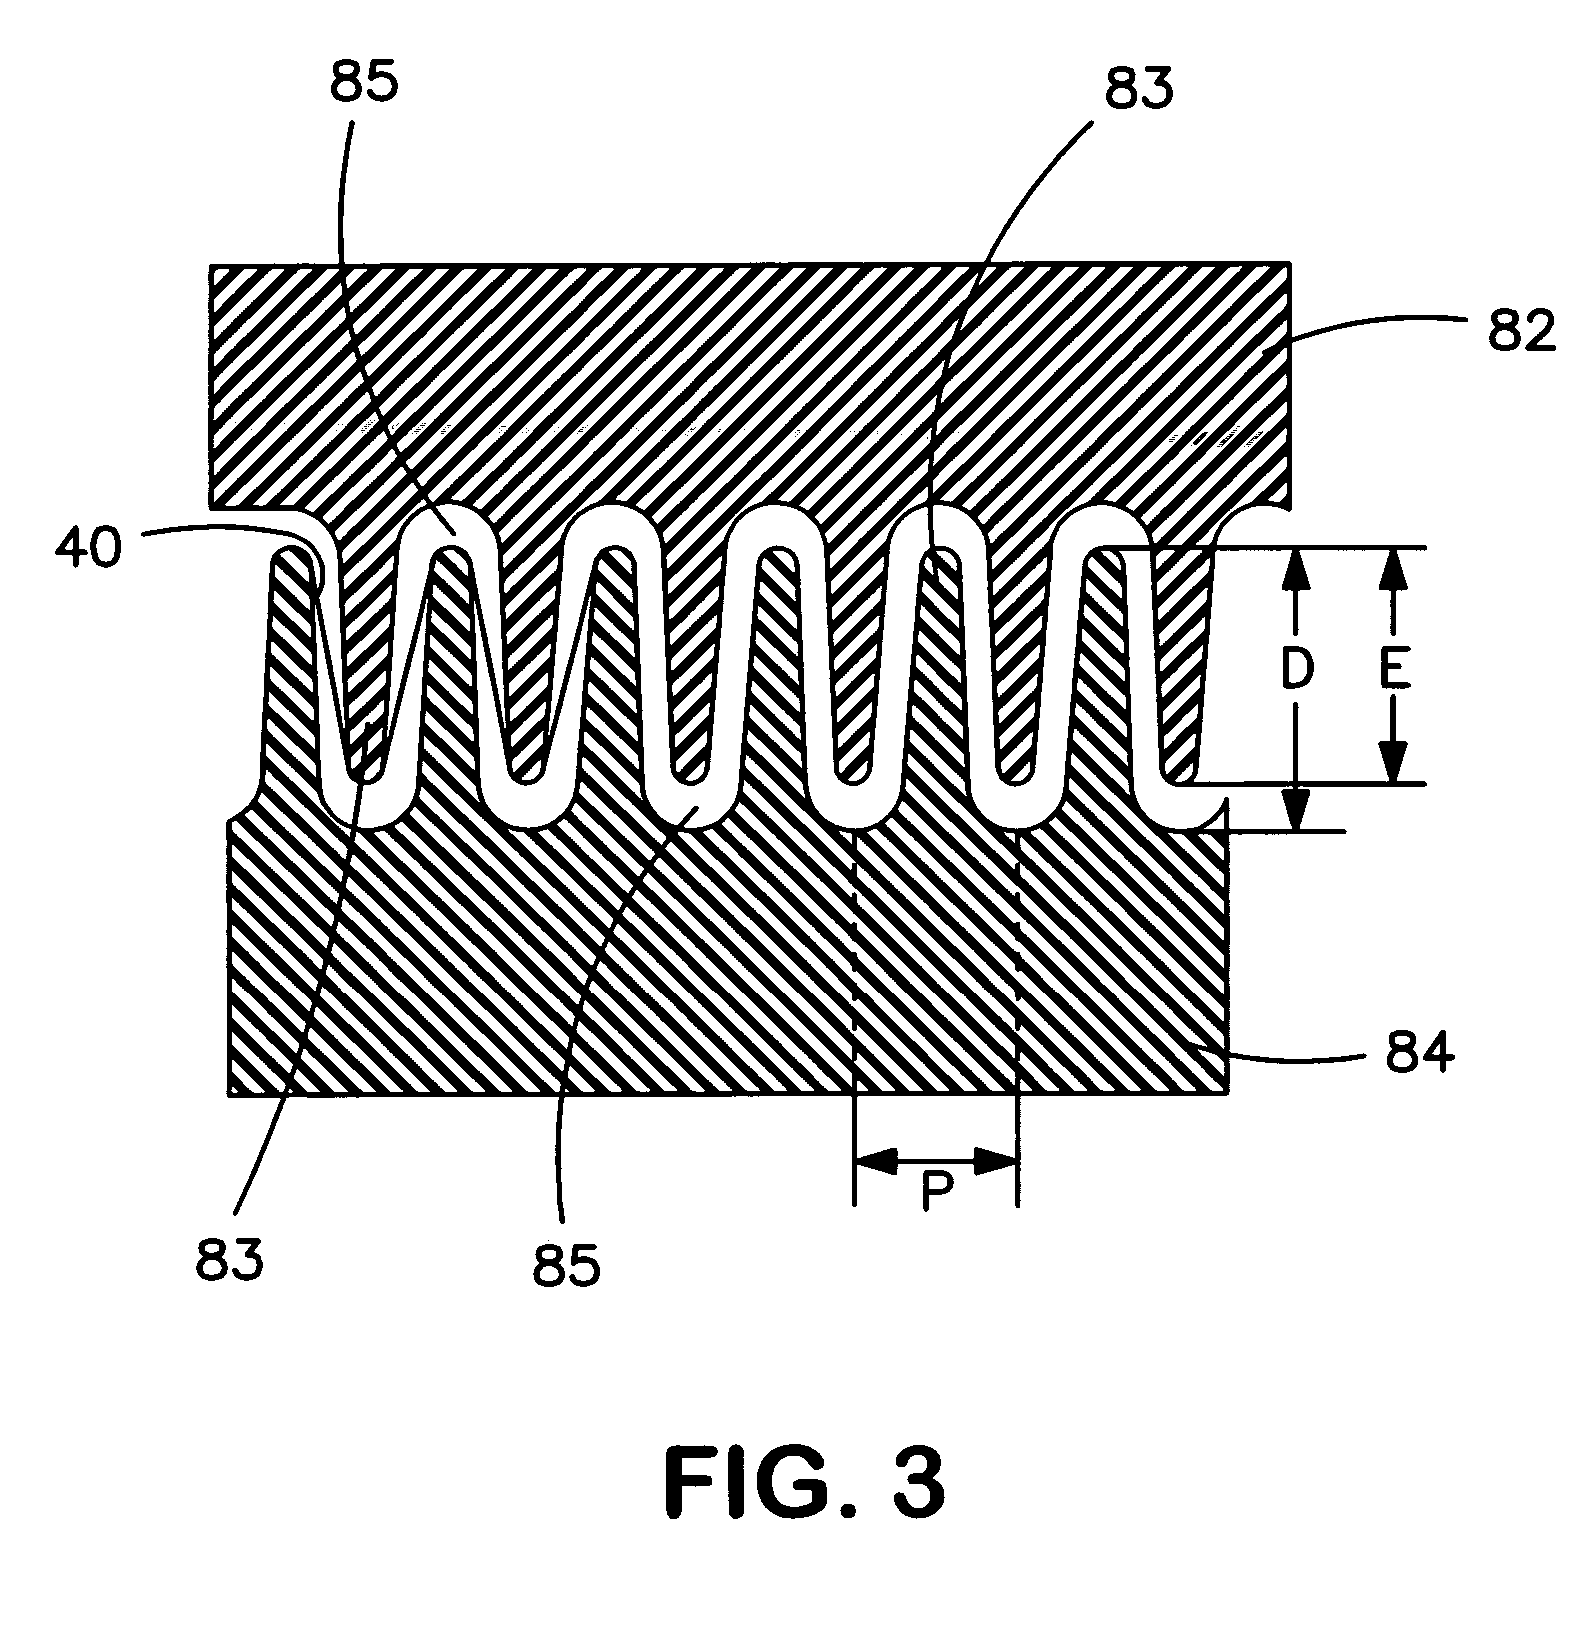 Method for forming an elastic laminate